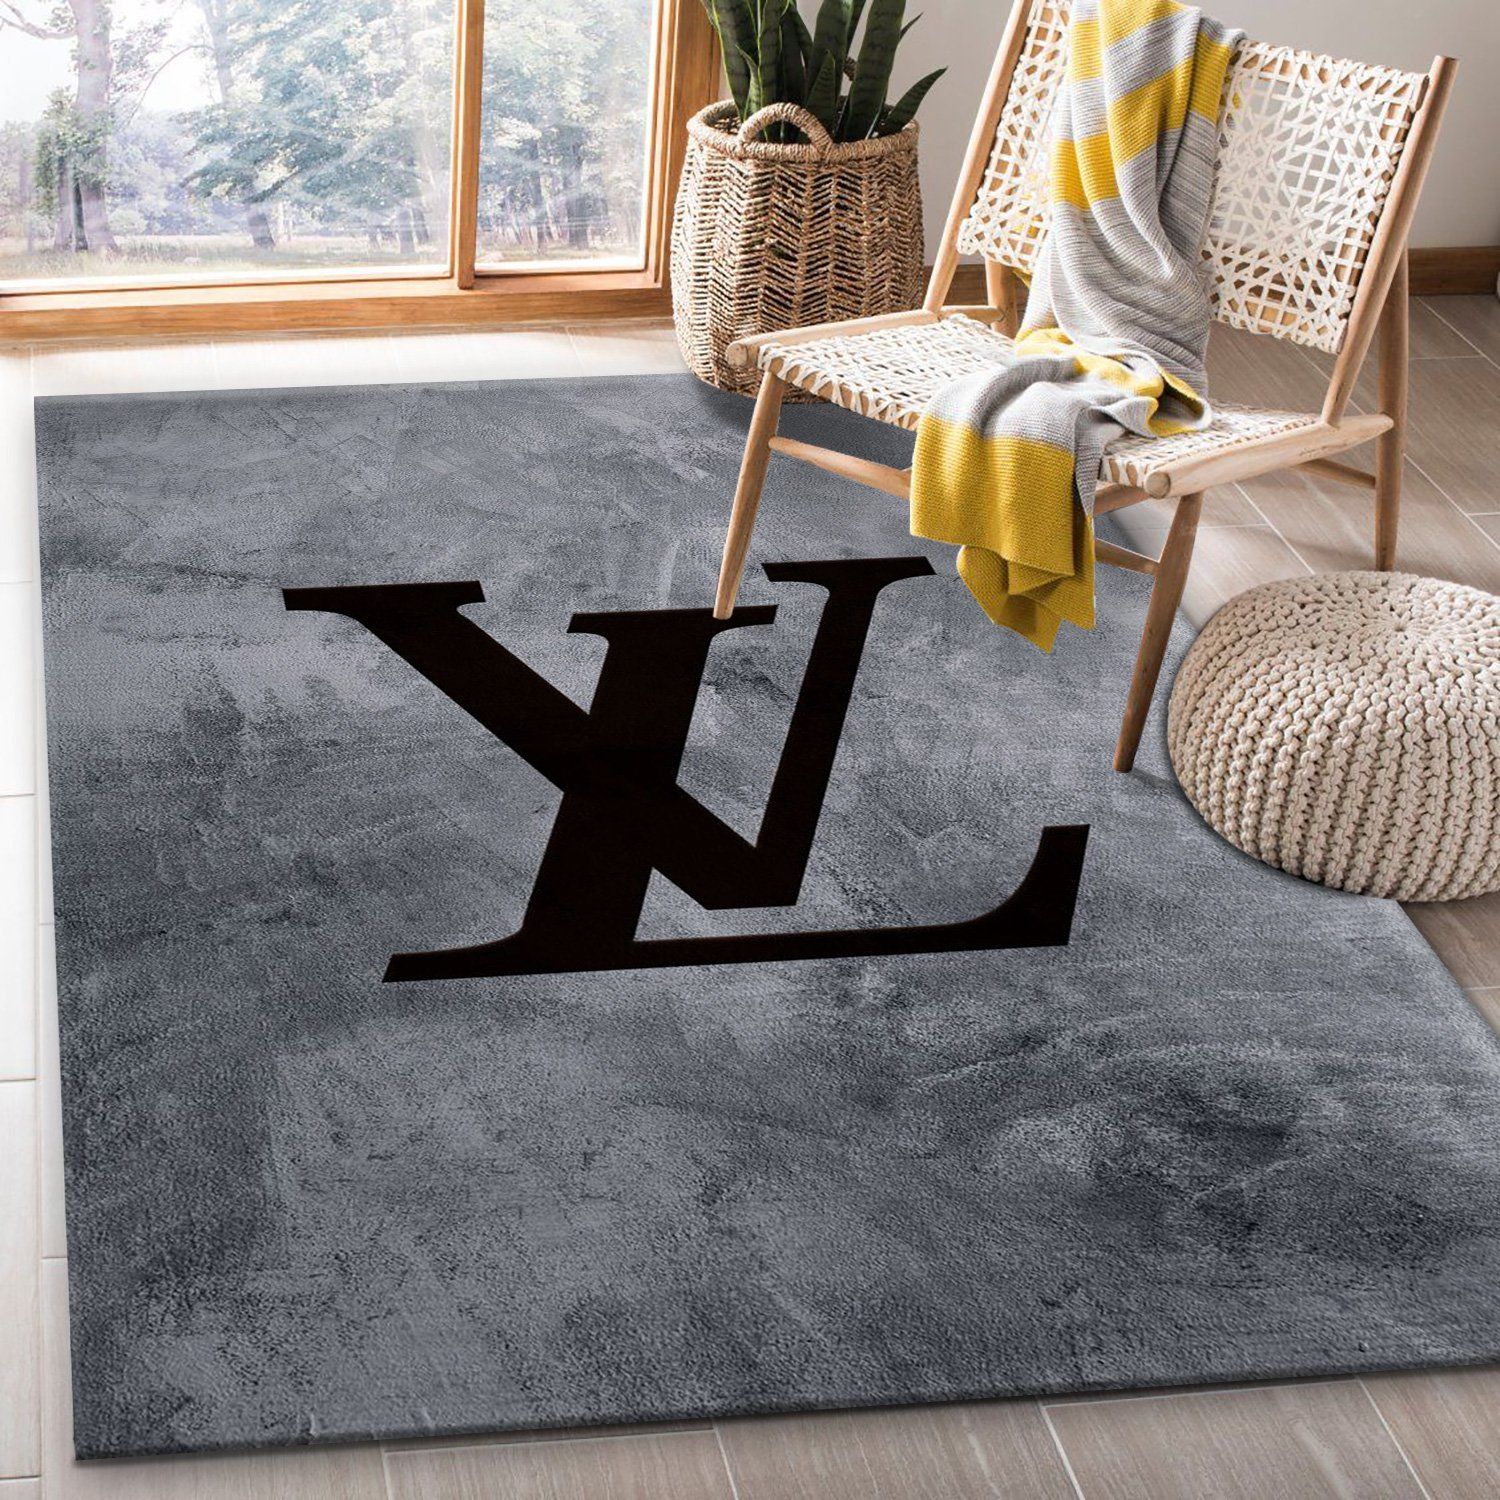 Louis Vuitton Rug Bedroom Rug Christmas Gift US Decor - Travels in